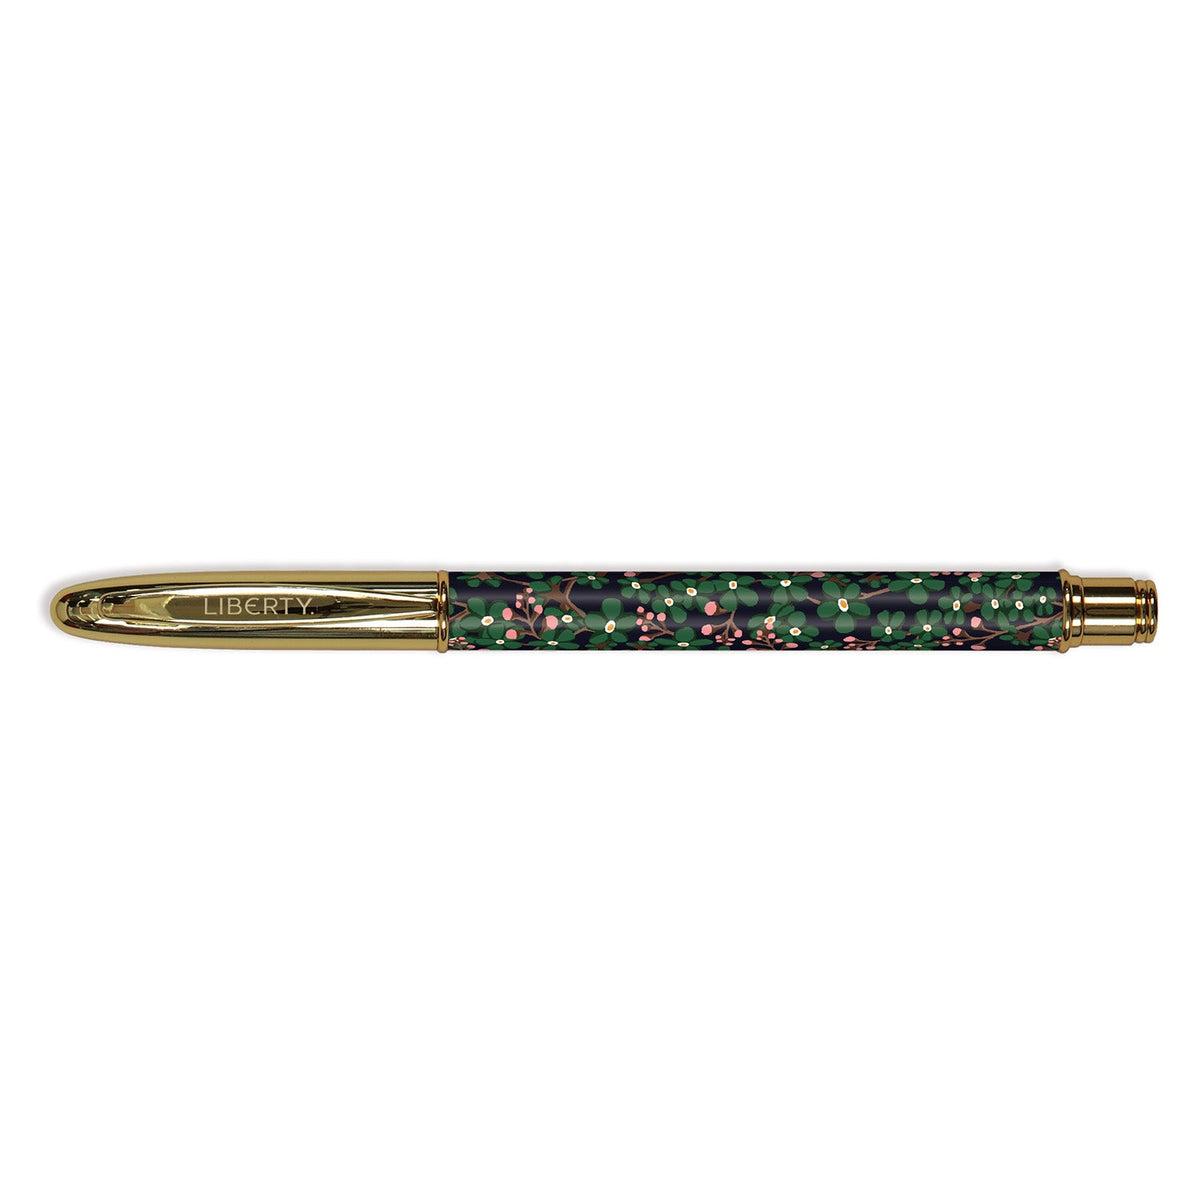 liberty-star-anise-boxed-pen-galison-732702